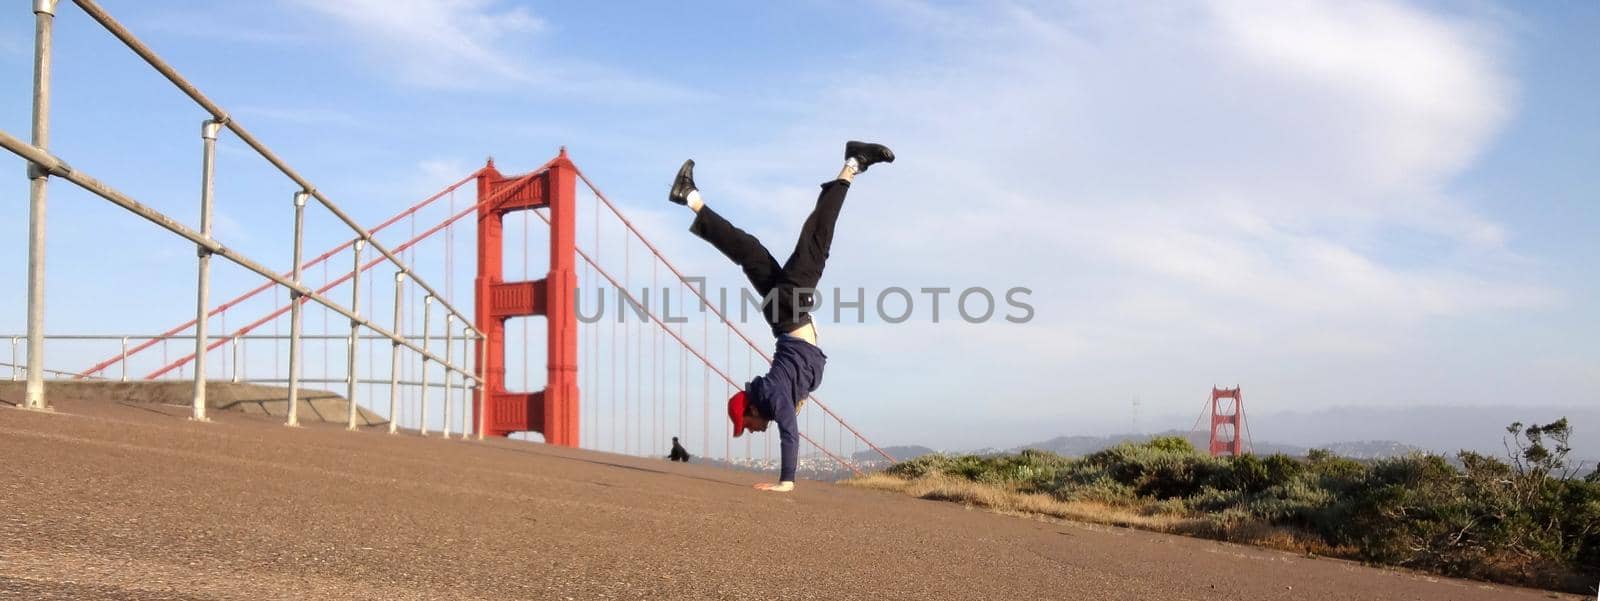 Man wearing hat, hoodie, long pants and shoes Handstands in front of the Golden Gate Bridge on the Marin side with San Francisco, California in the distance.